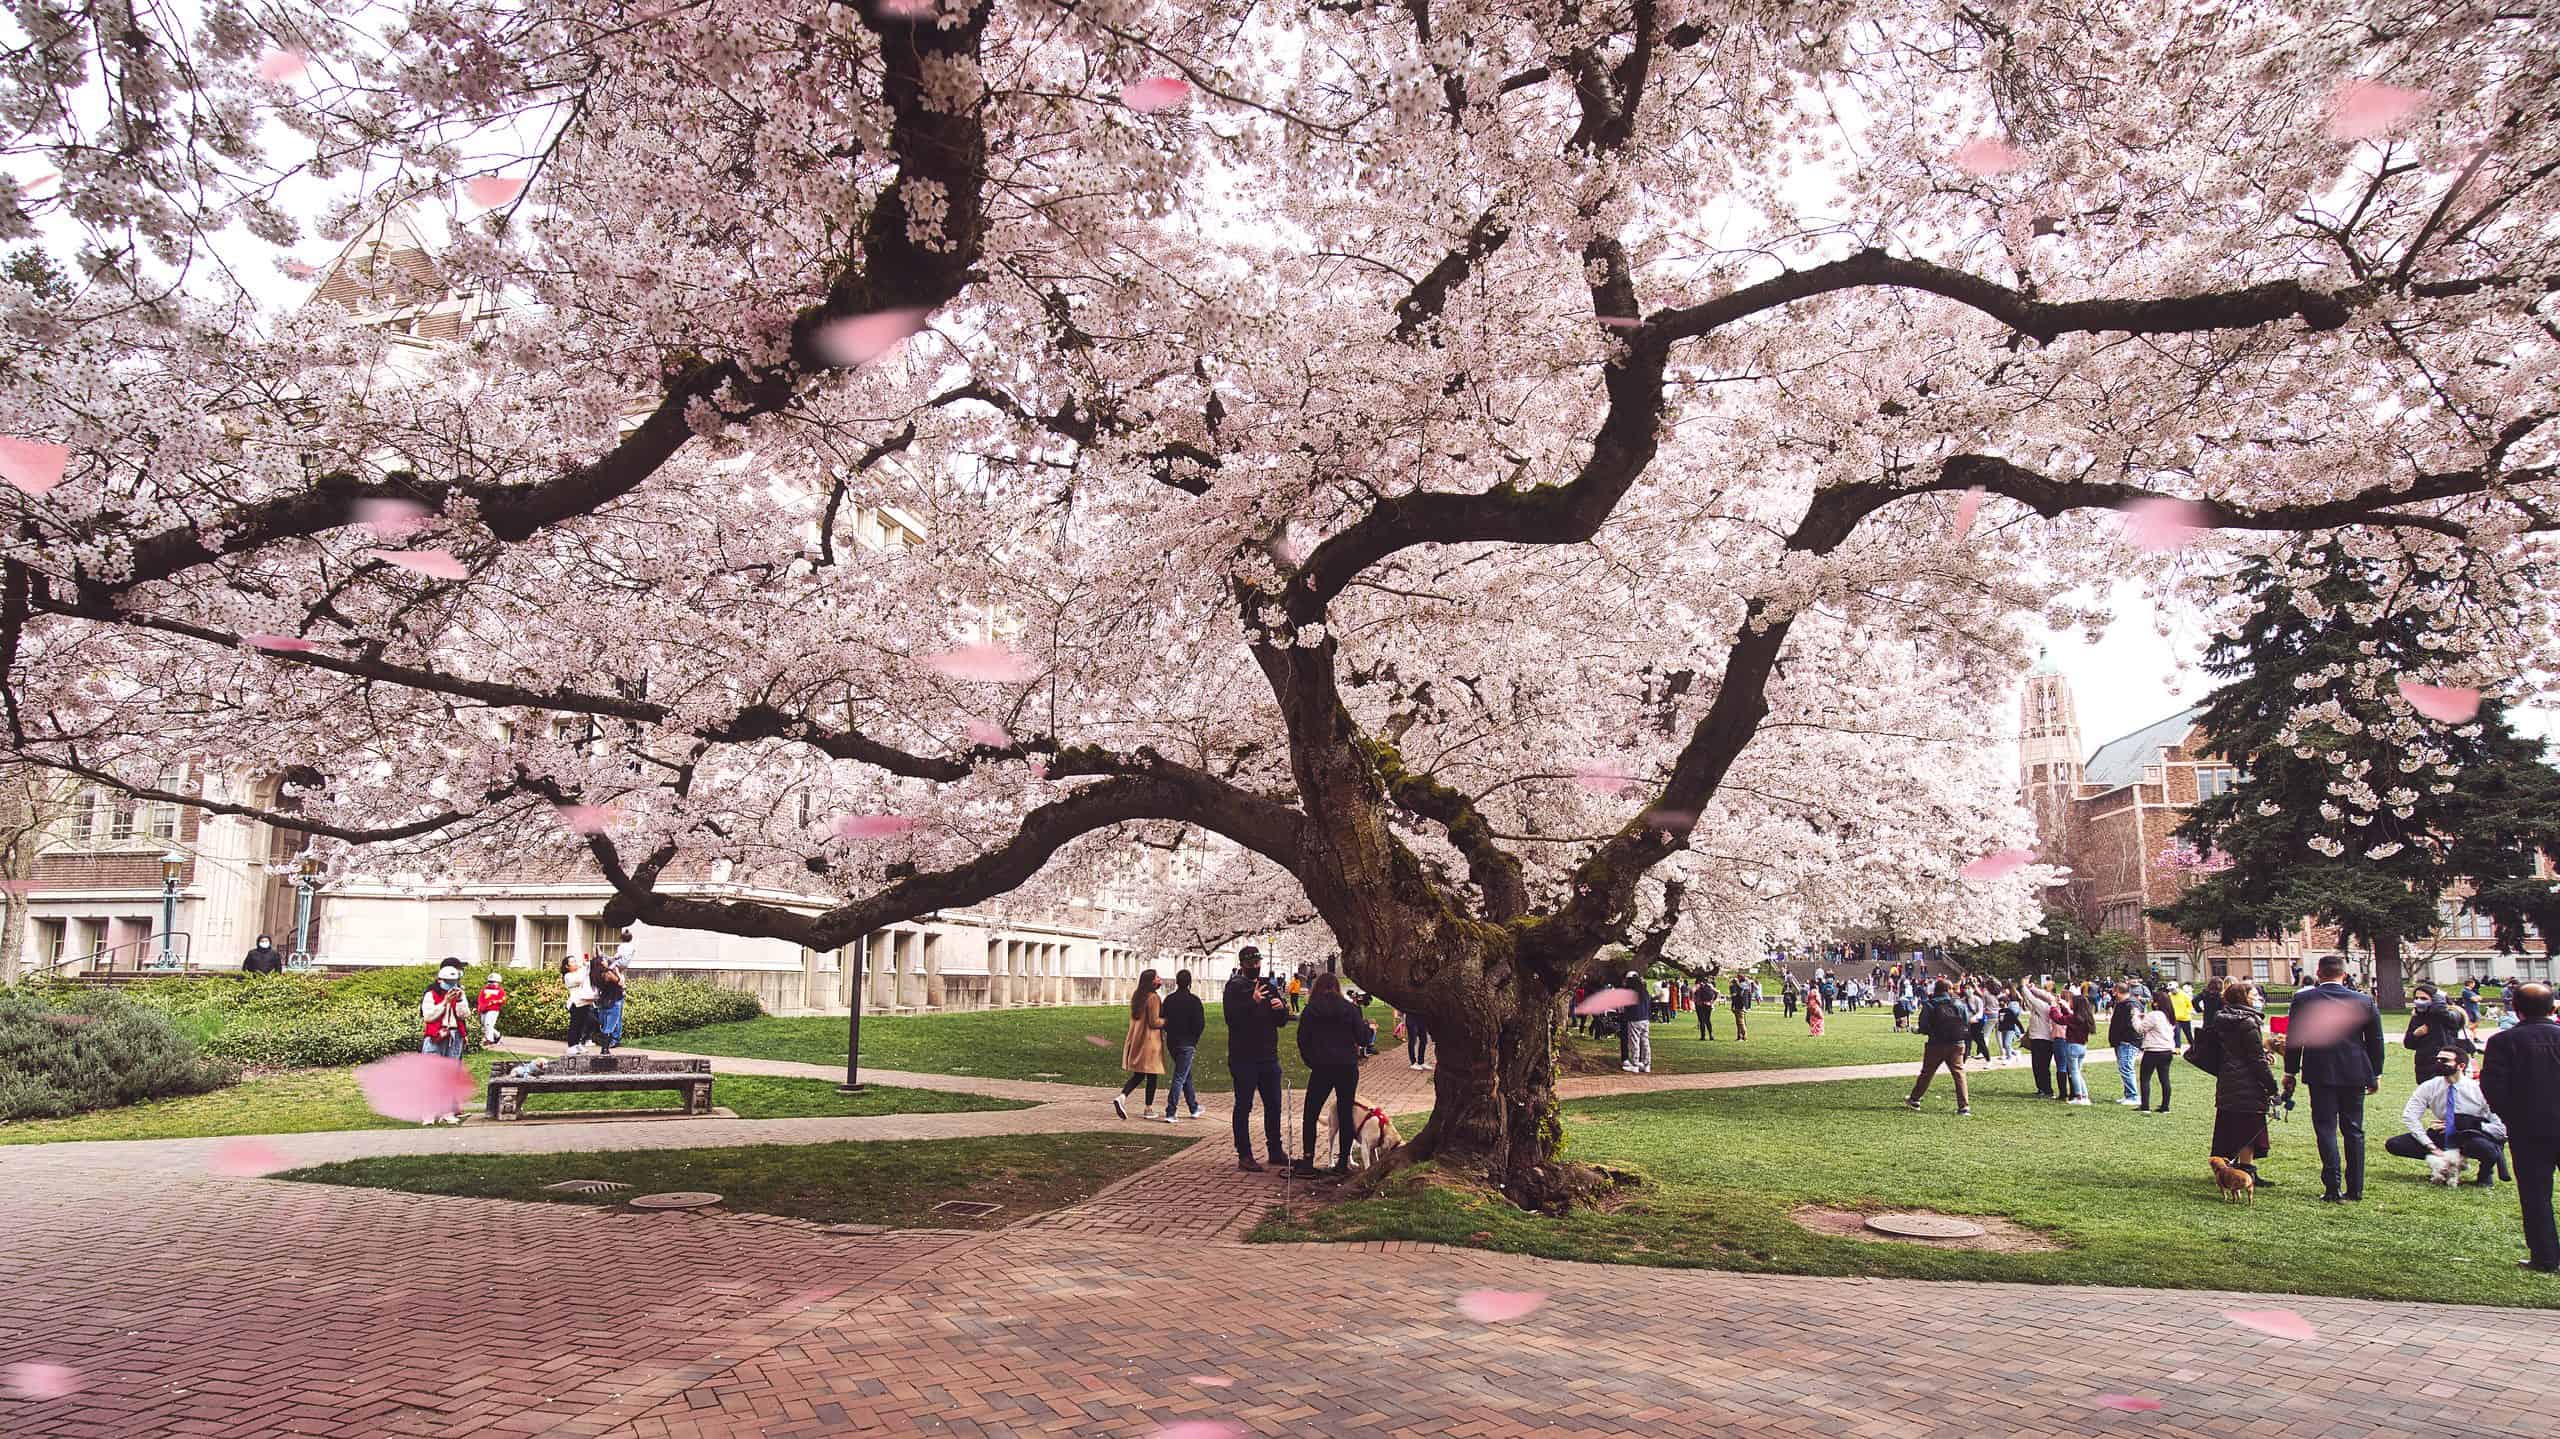 <p>In Seattle, the best place to view blooming cherry blossom trees is on the University of Washington campus. The trees line the quad and they peak around the end of March.</p><p>Sharks, lions, alligators, and more! Don’t miss today’s latest and most exciting animal news. <strong><a href="https://www.msn.com/en-us/channel/source/AZ%20Animals%20US/sr-vid-7etr9q8xun6k6508c3nufaum0de3dqktiq6h27ddeagnfug30wka">Click here to access the A-Z Animals profile page</a> and be sure to hit the <em>Follow</em> button here or at the top of this article!</strong></p> <p>Have feedback? Add a comment below!</p>